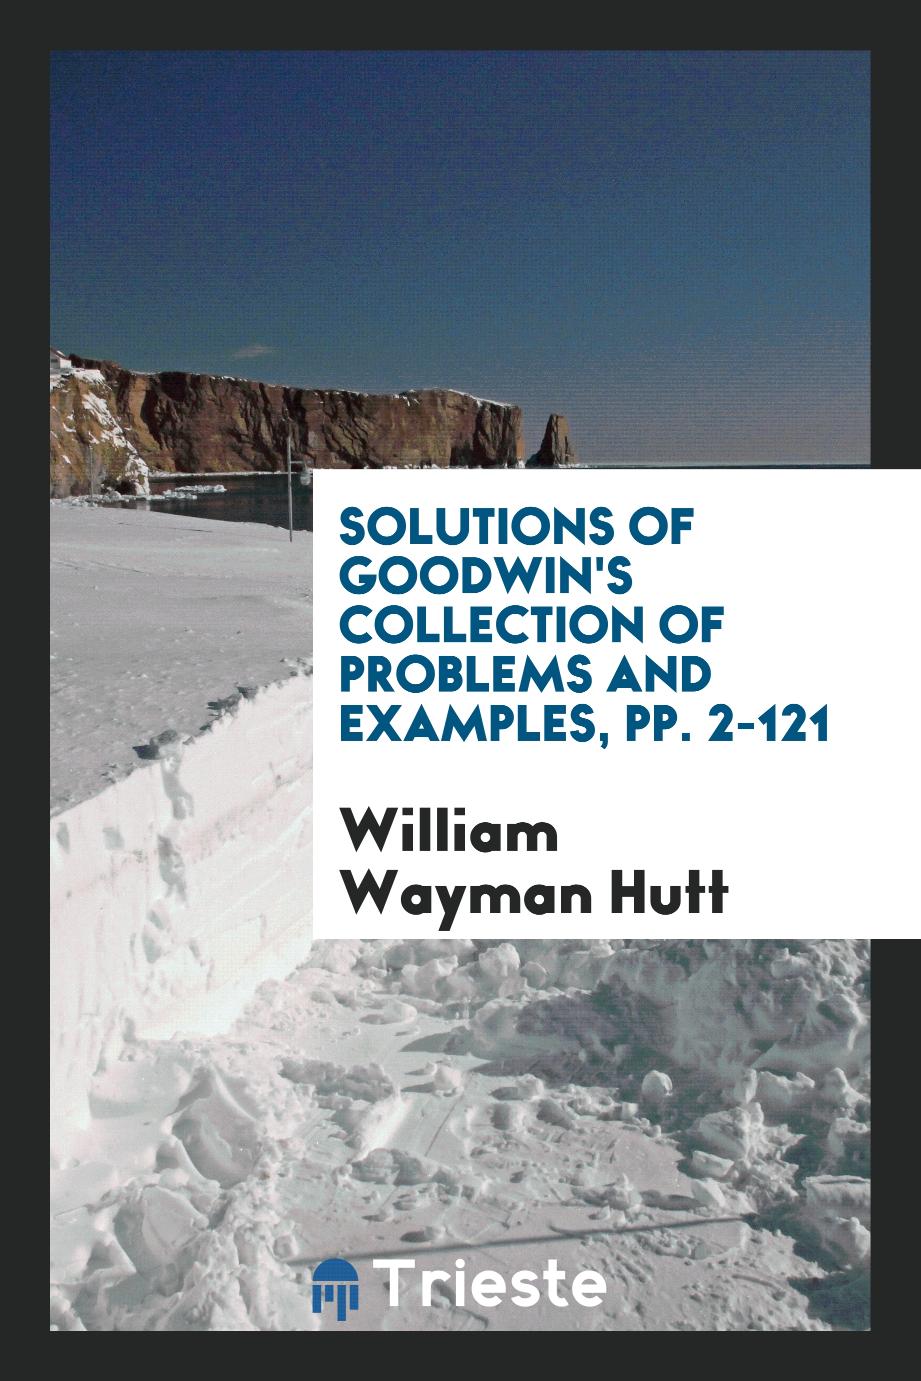 Solutions of Goodwin's Collection of Problems and Examples, pp. 2-121